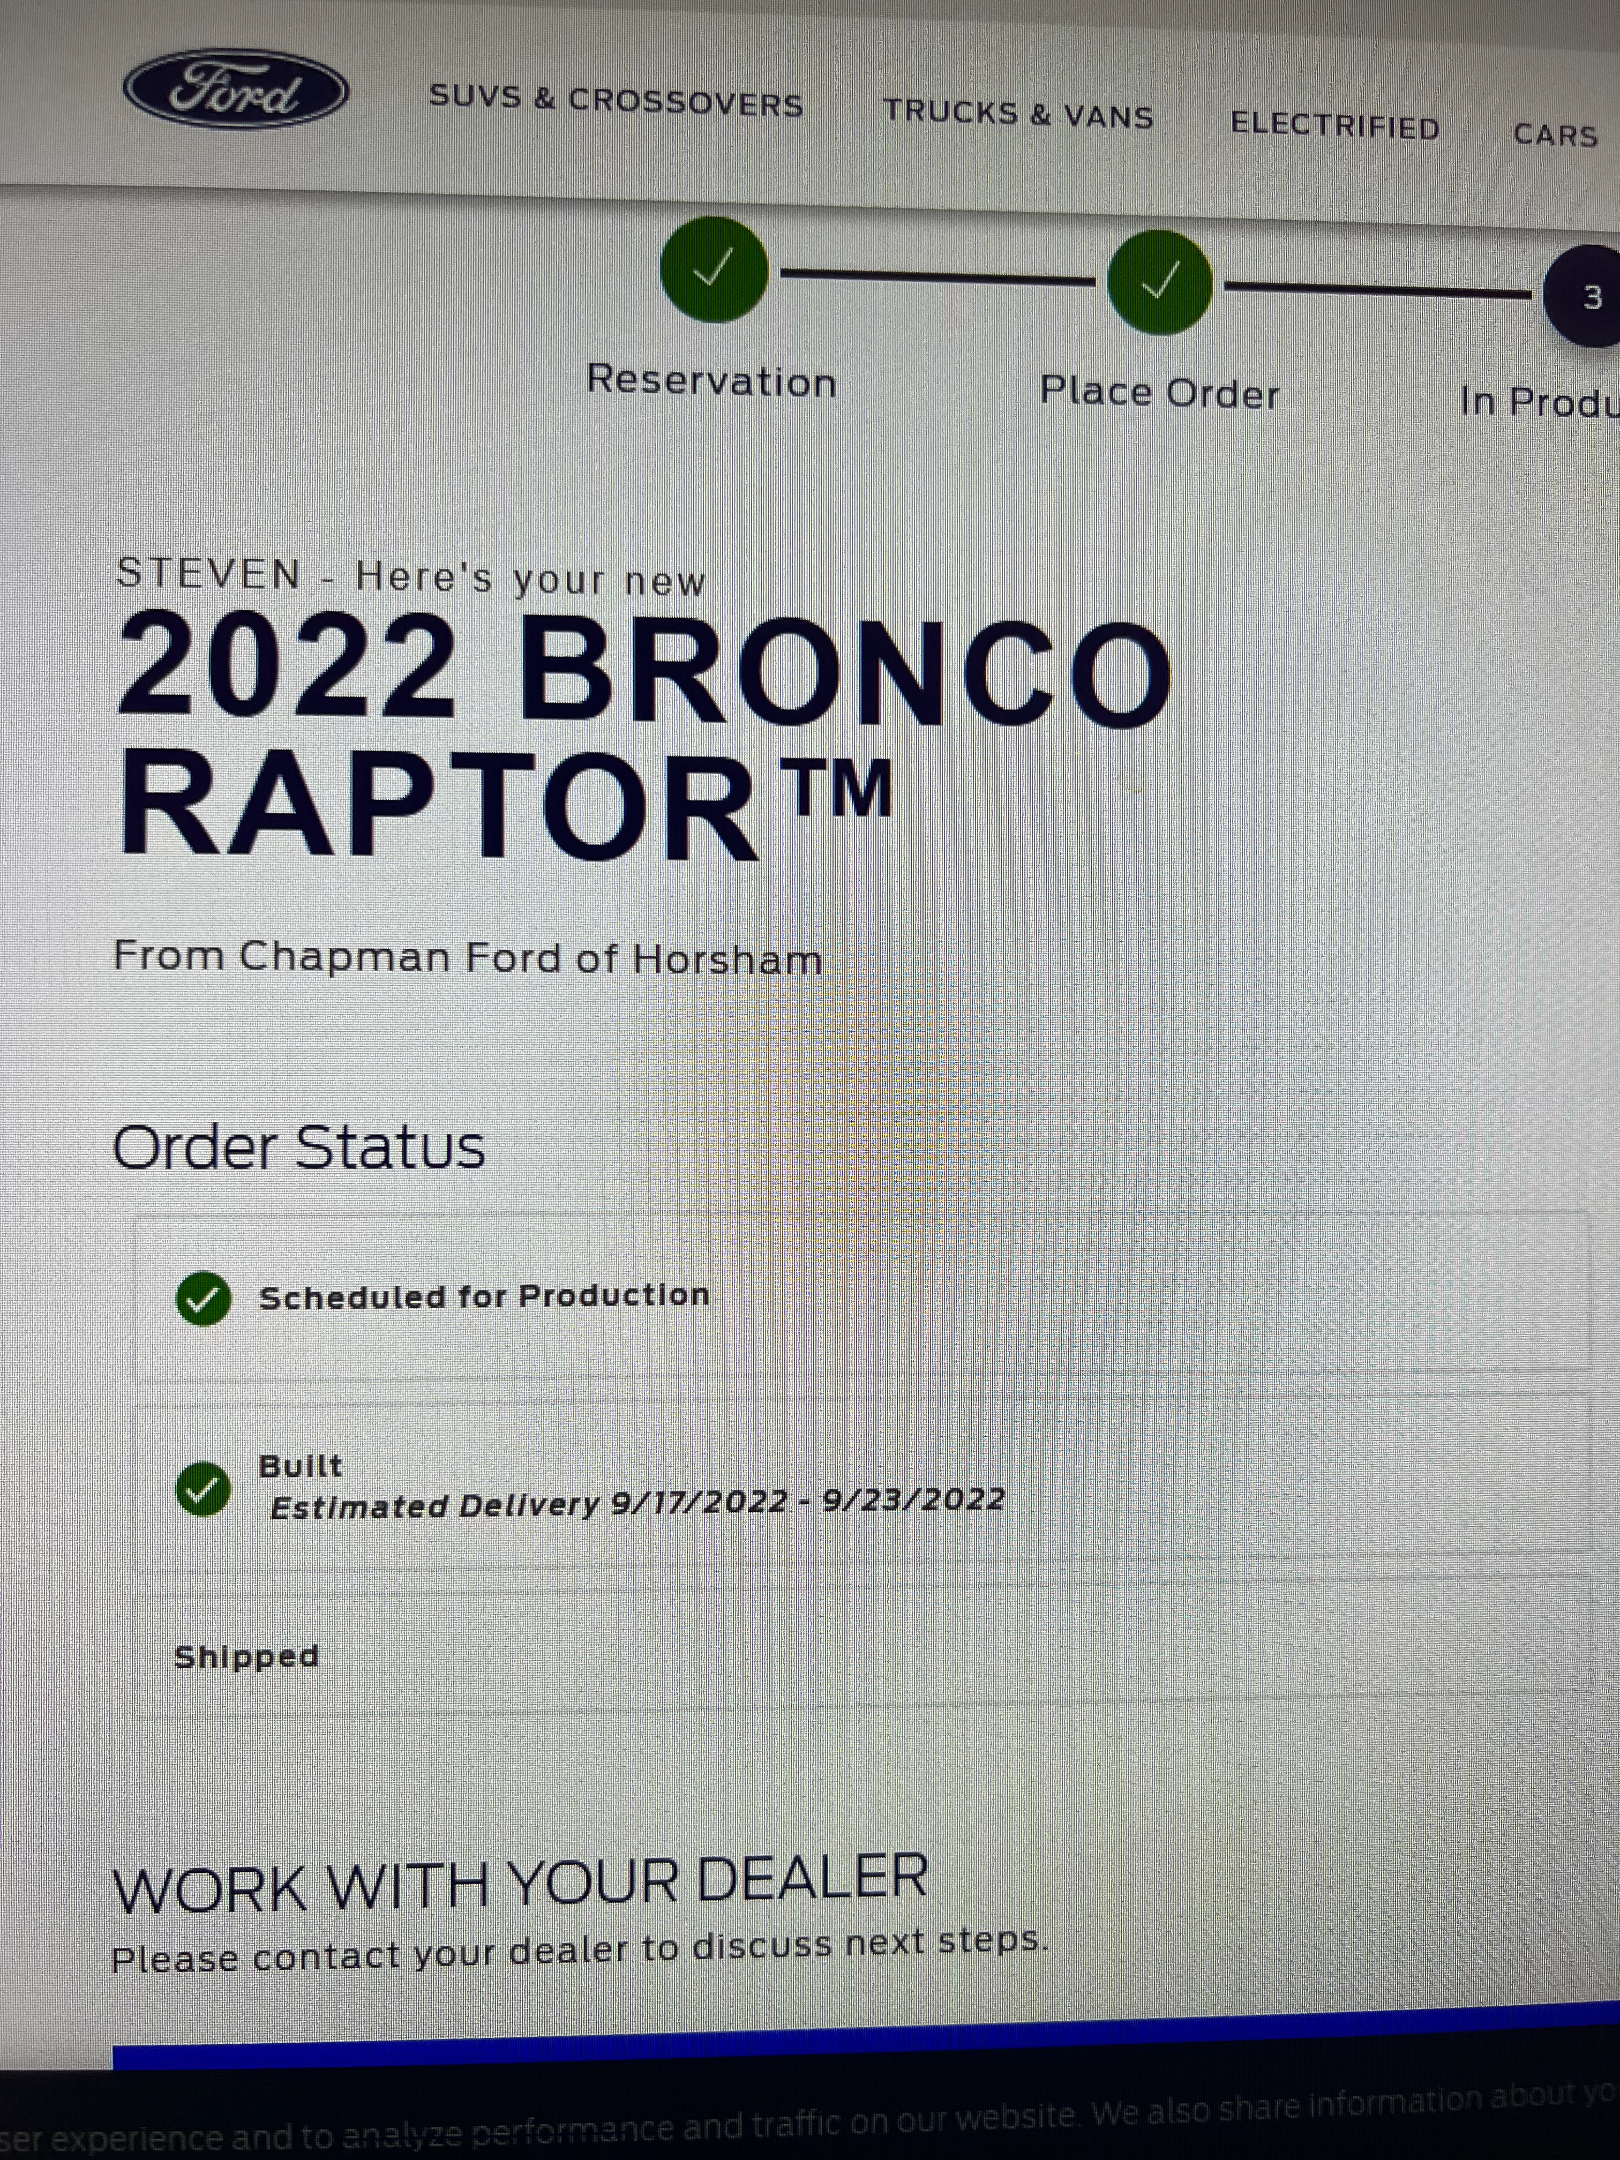 Ford Bronco ⏳ Bronco Raptor now being scheduled for production & VIN assigned 3A21C907-6A45-4DE7-8F8C-25B71FAFF5A1